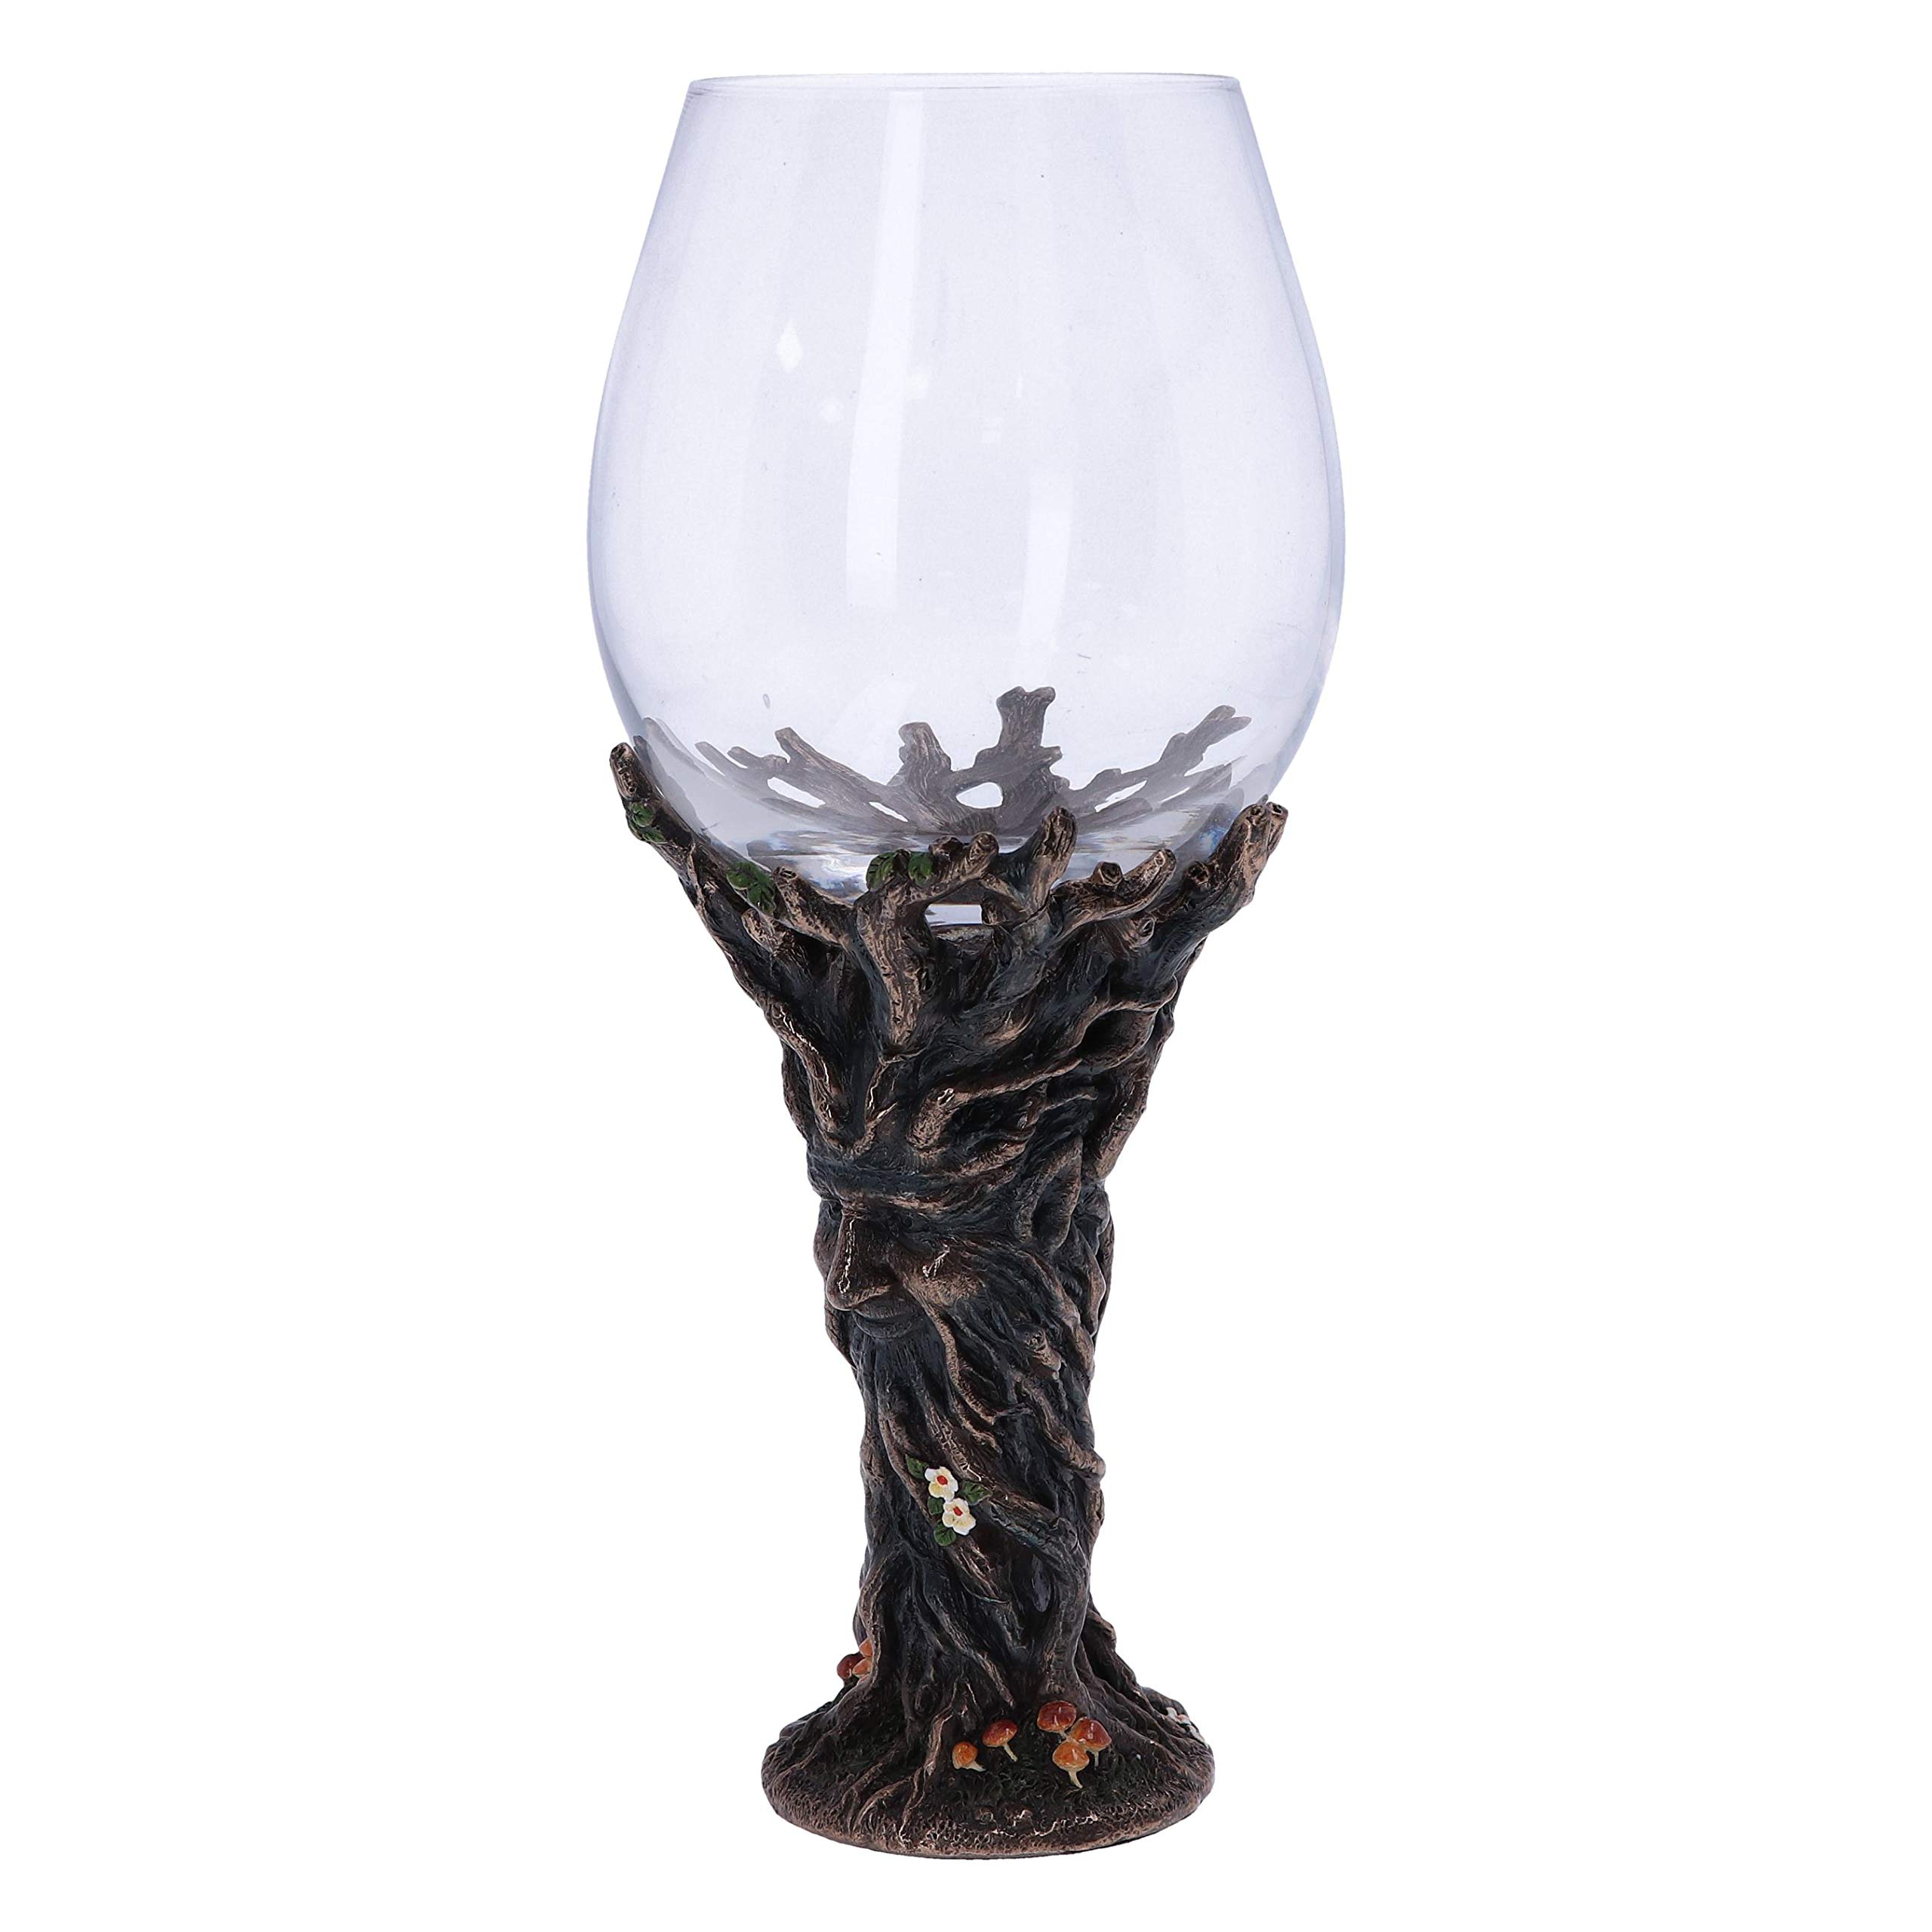 Nemesis Now Bronze Forest Nectar Ancient Tree Spirit Green Man Goblet Wine Glass, 1 Count (Pack of 1)